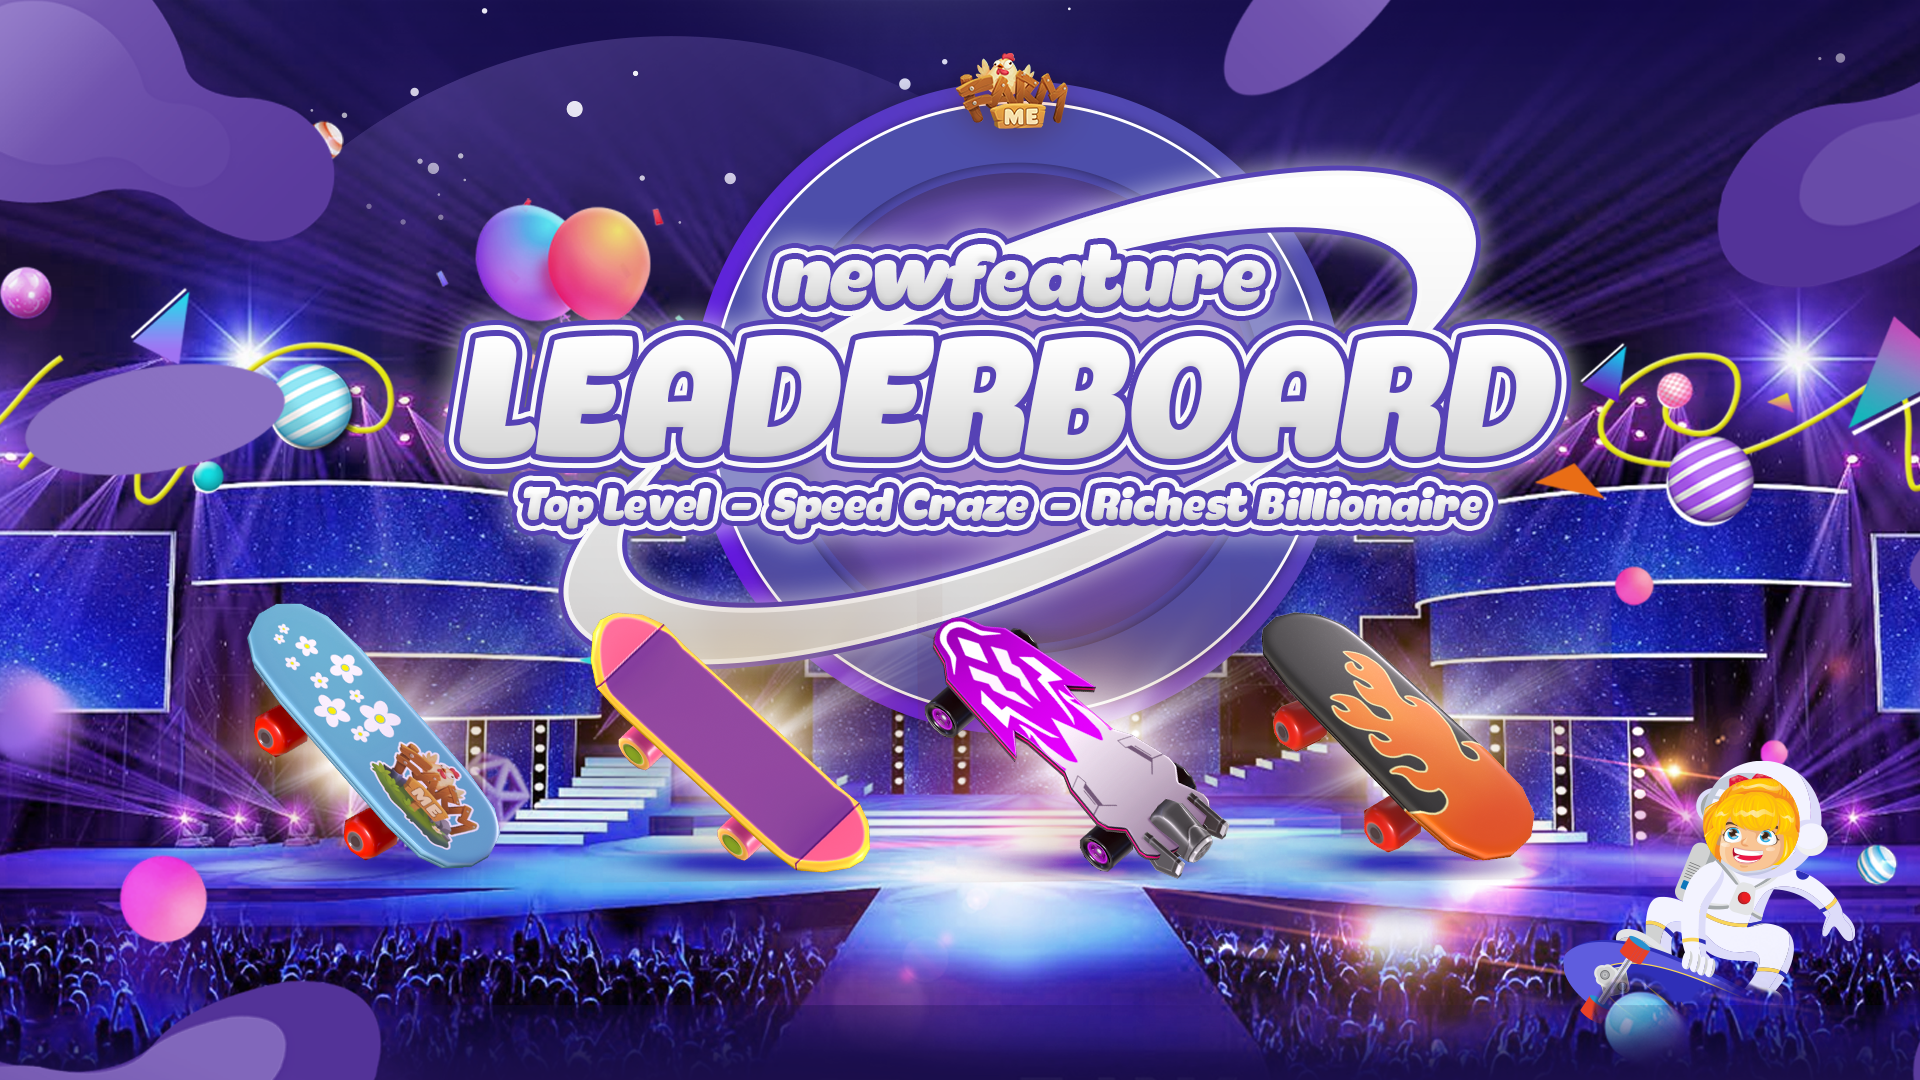 New feature: LeaderBoard - Hall of Fame has officially launched